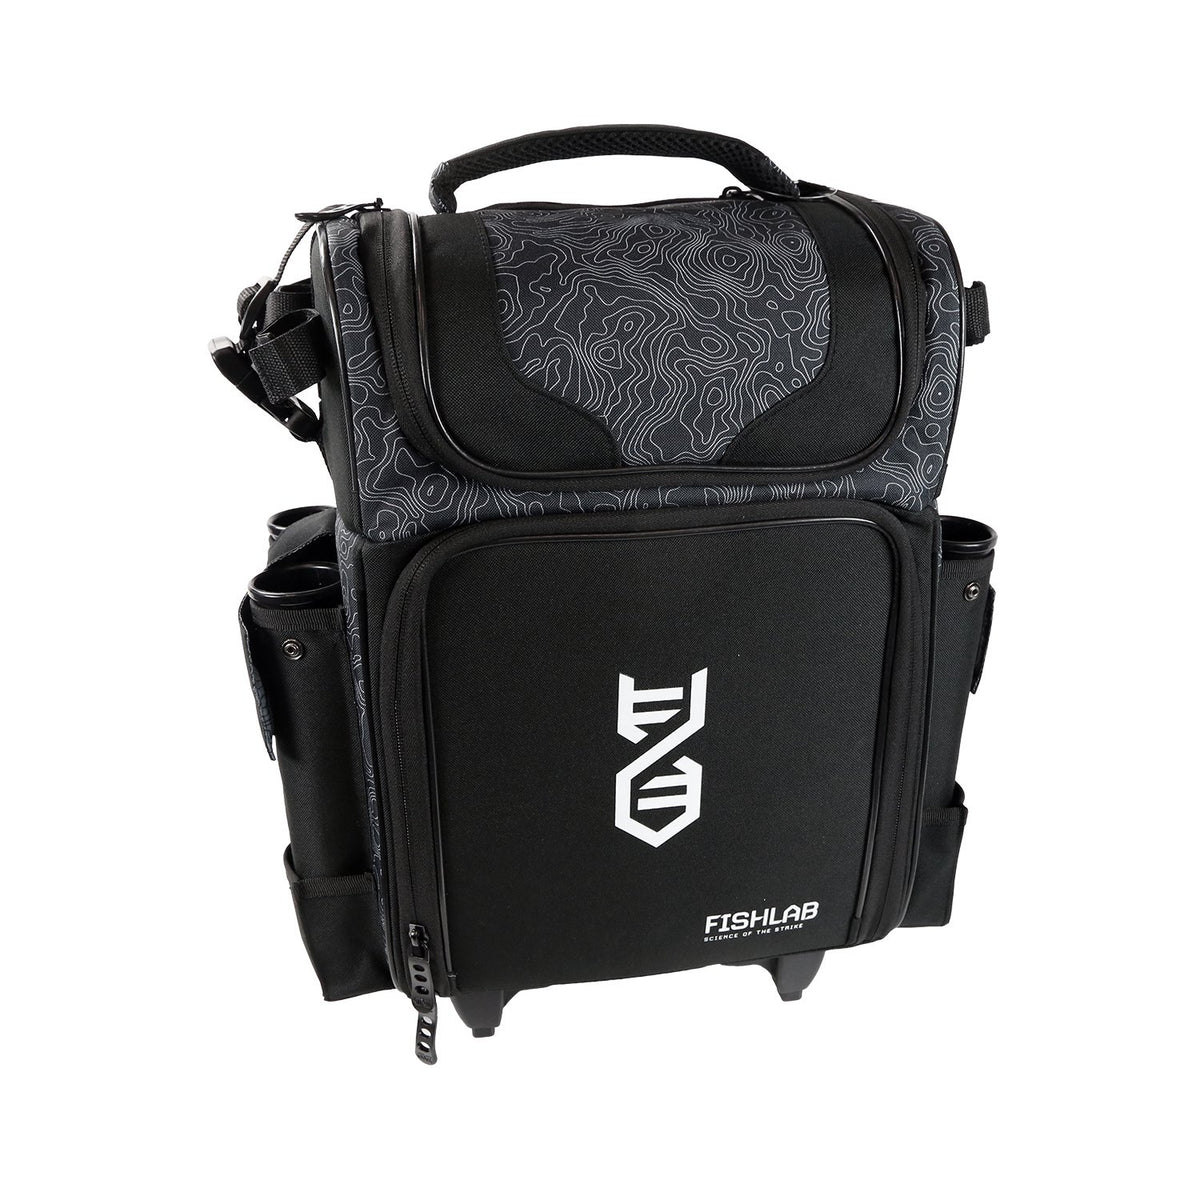 Shimano Deluxe 360 Tackle Backpack